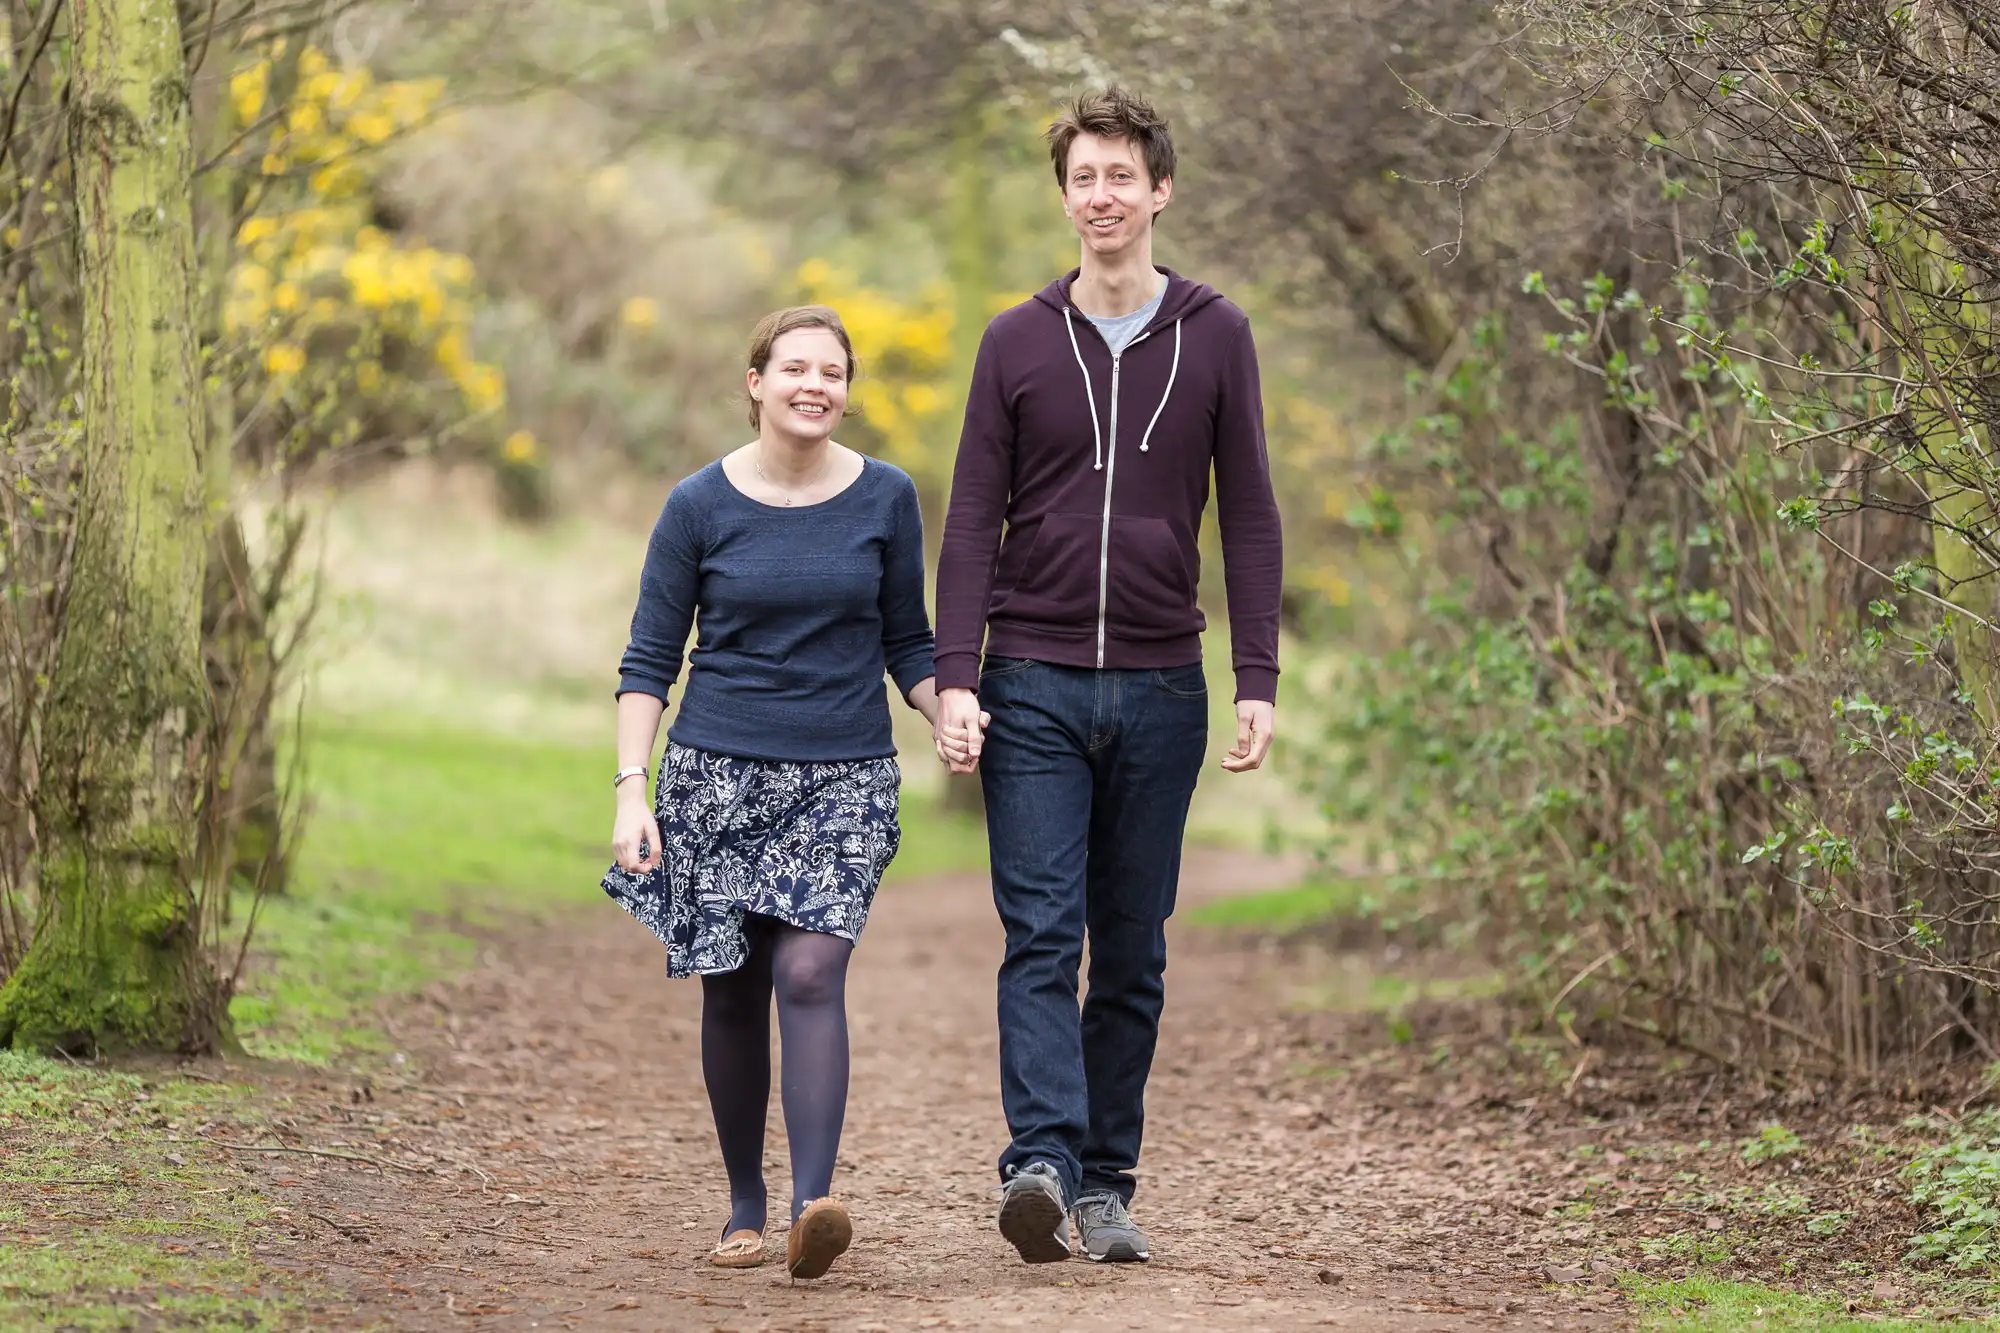 A young couple walking hand in hand down a dirt path surrounded by greenery and blooming yellow shrubs.